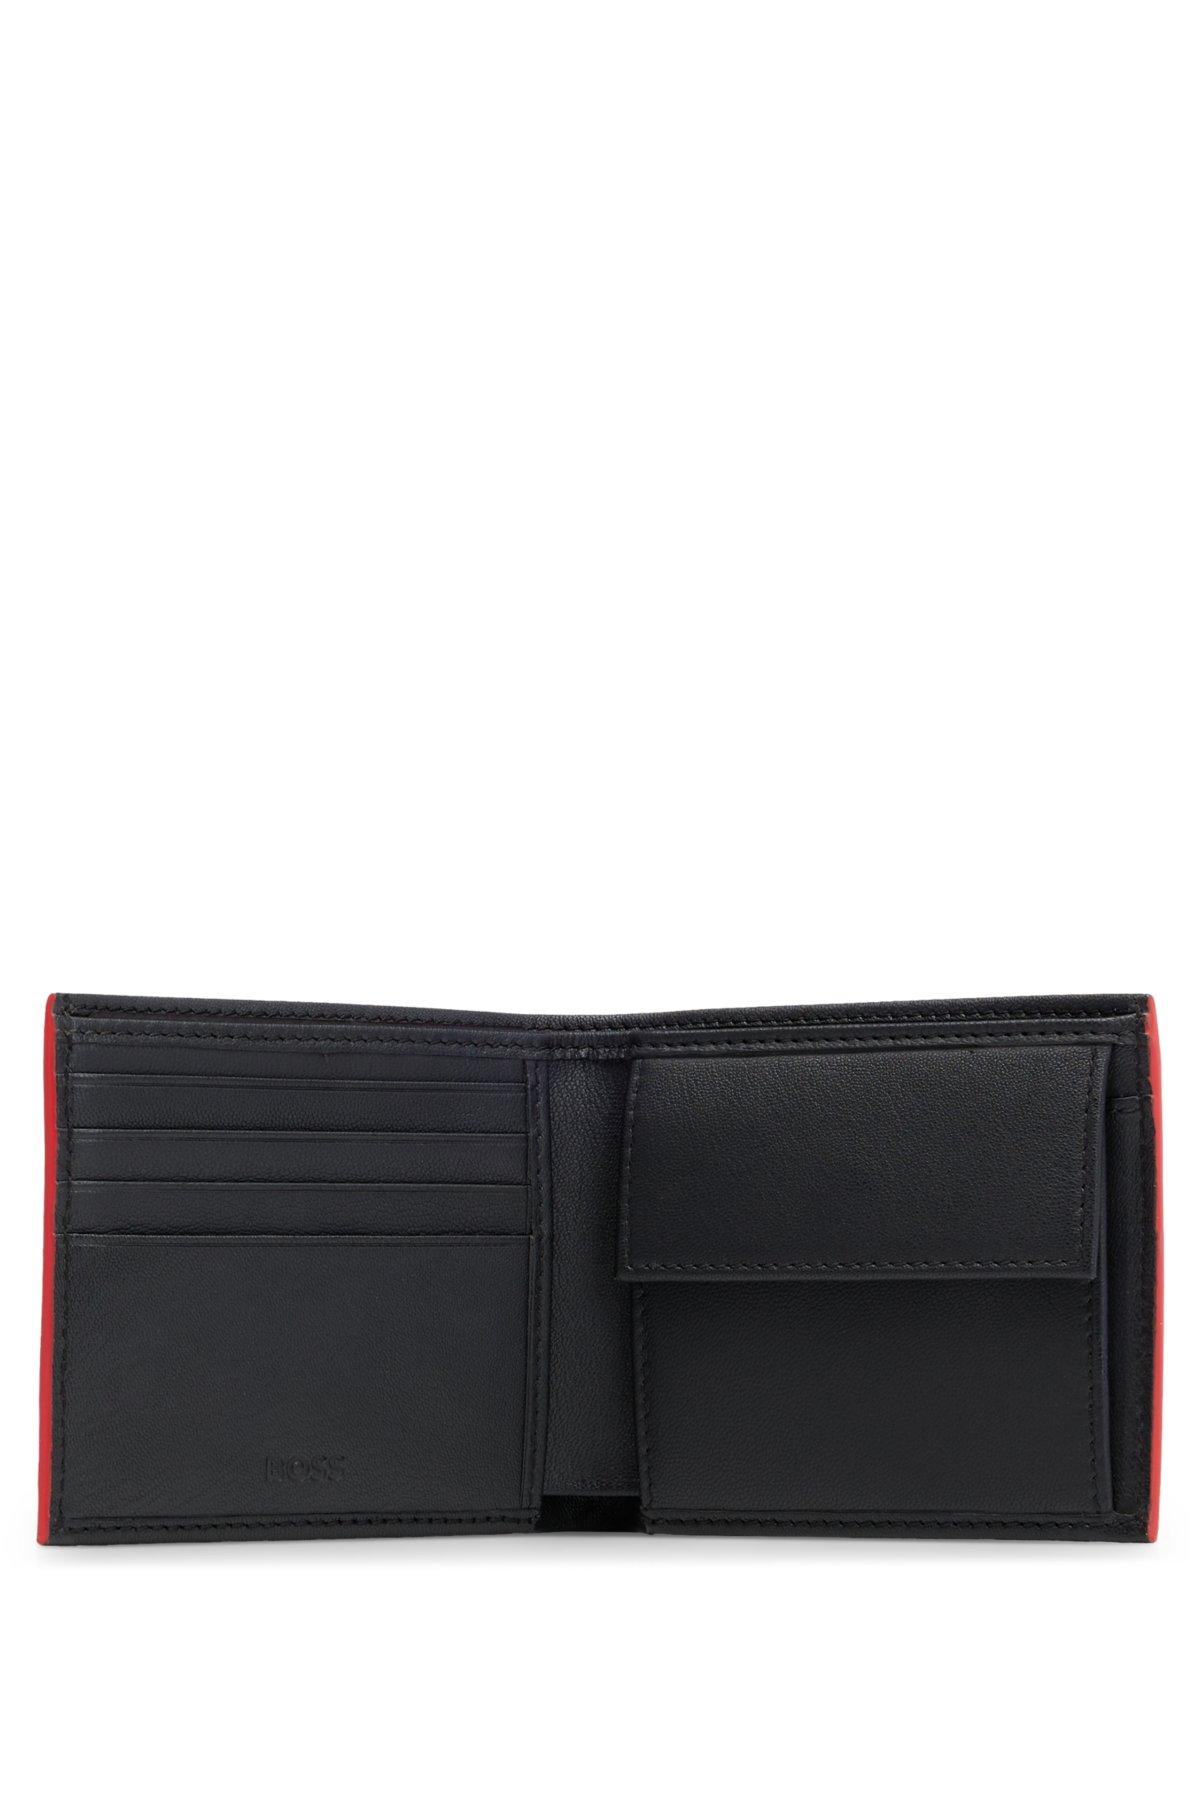 Logo-embossed leather wallet with coin pocket, Black